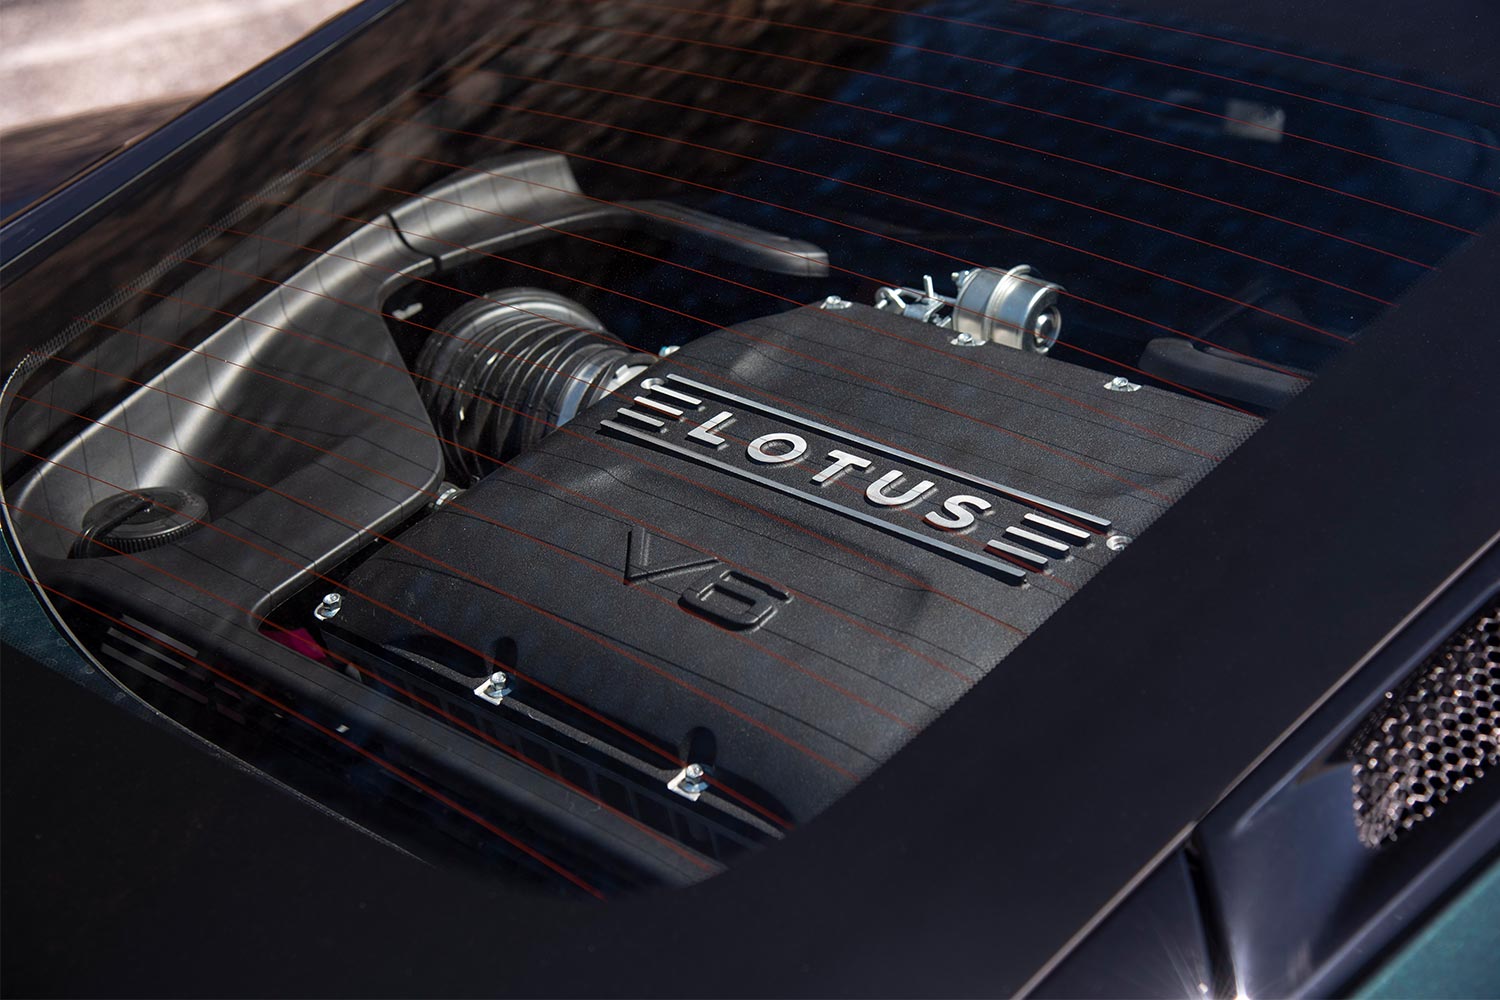 The 3.5-liter supercharged V6, sourced from Toyota, in the Lotus Emira